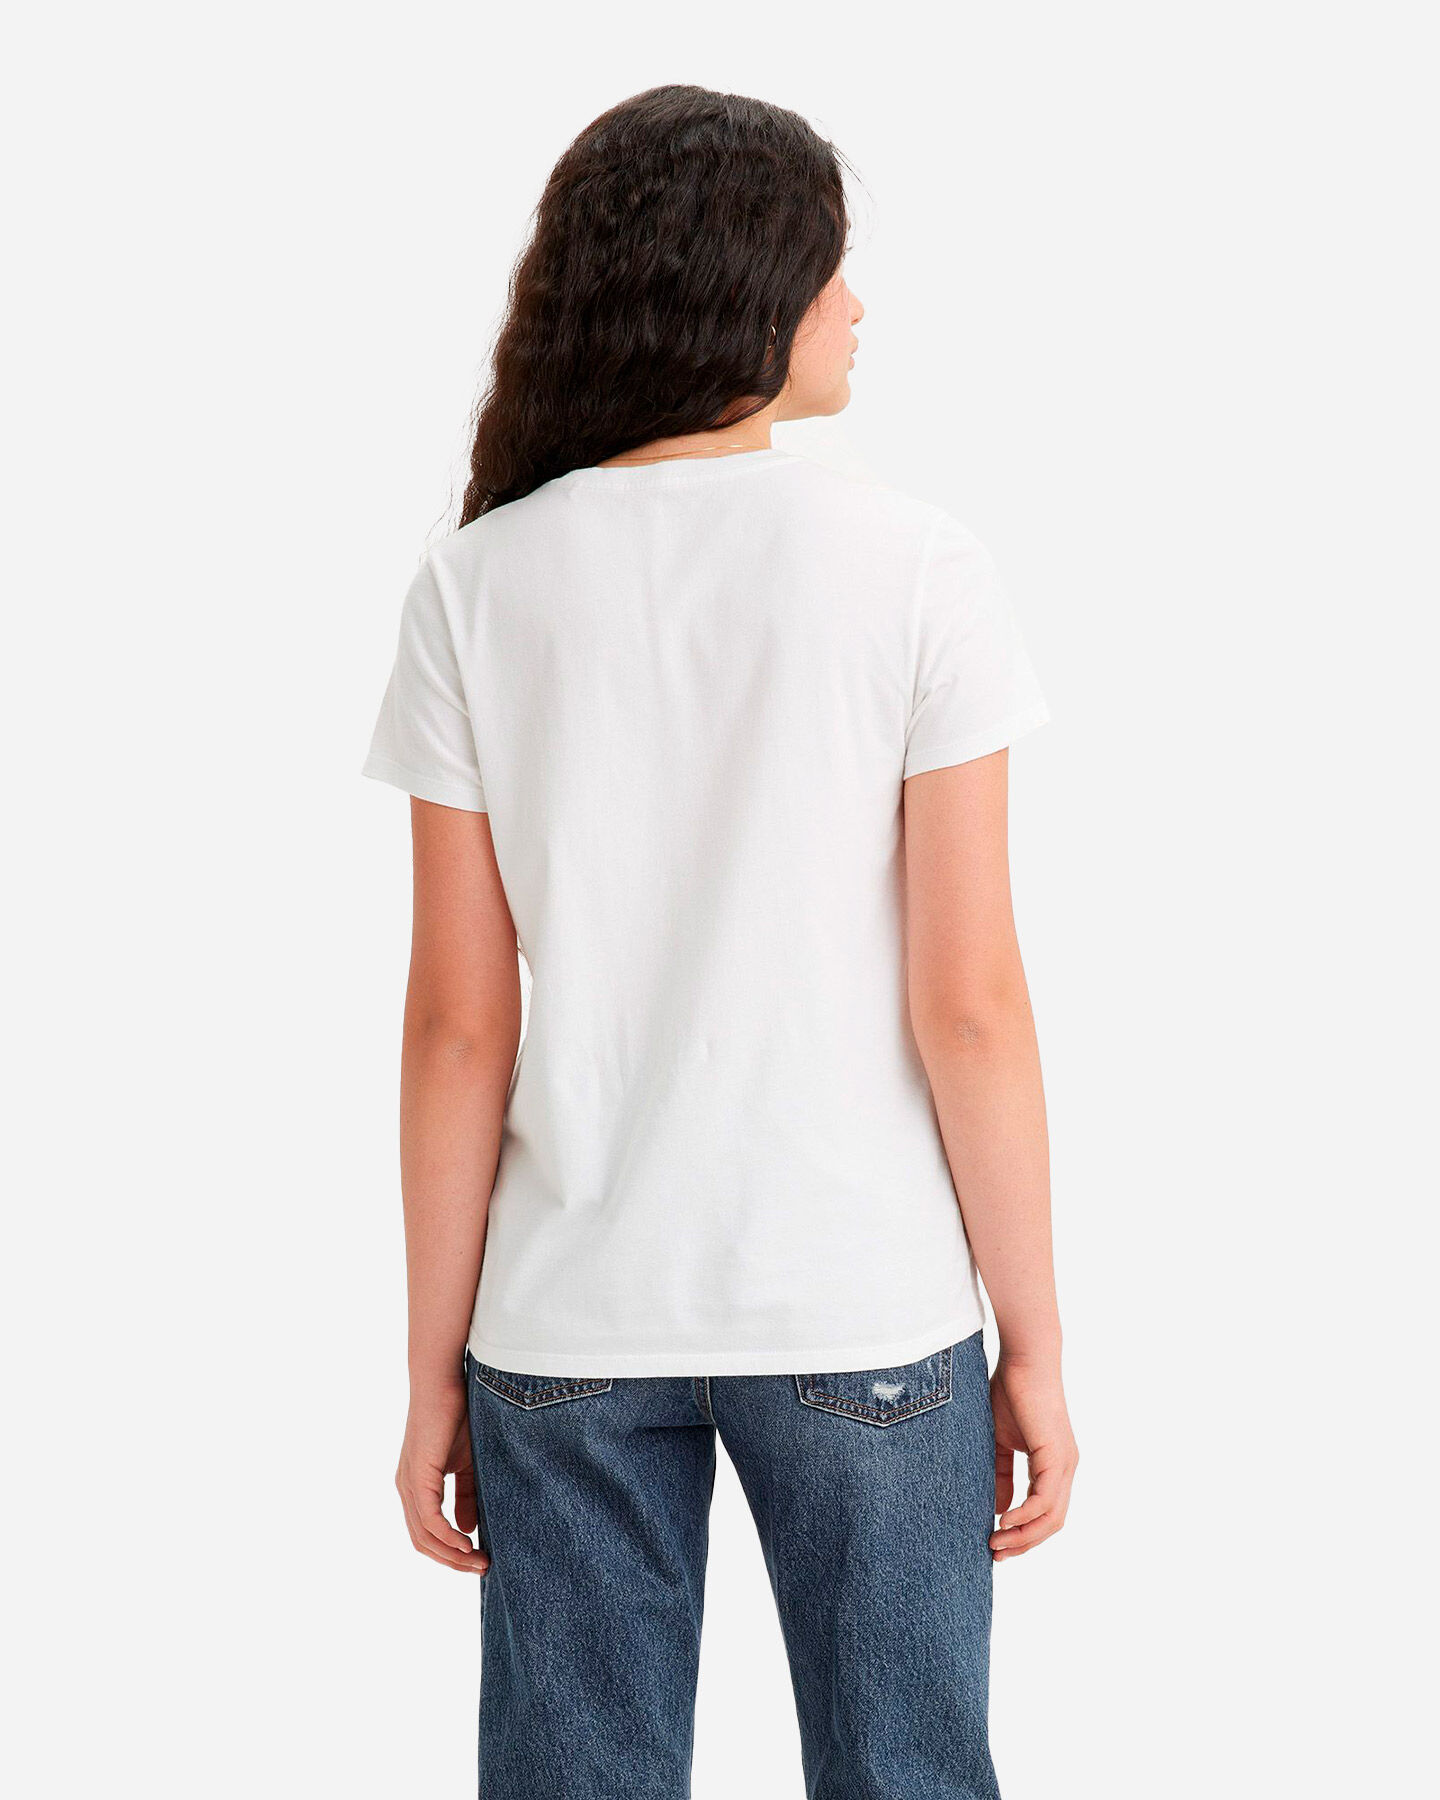  T-Shirt LEVI'S BATWING W S4132795|2436|XS scatto 3